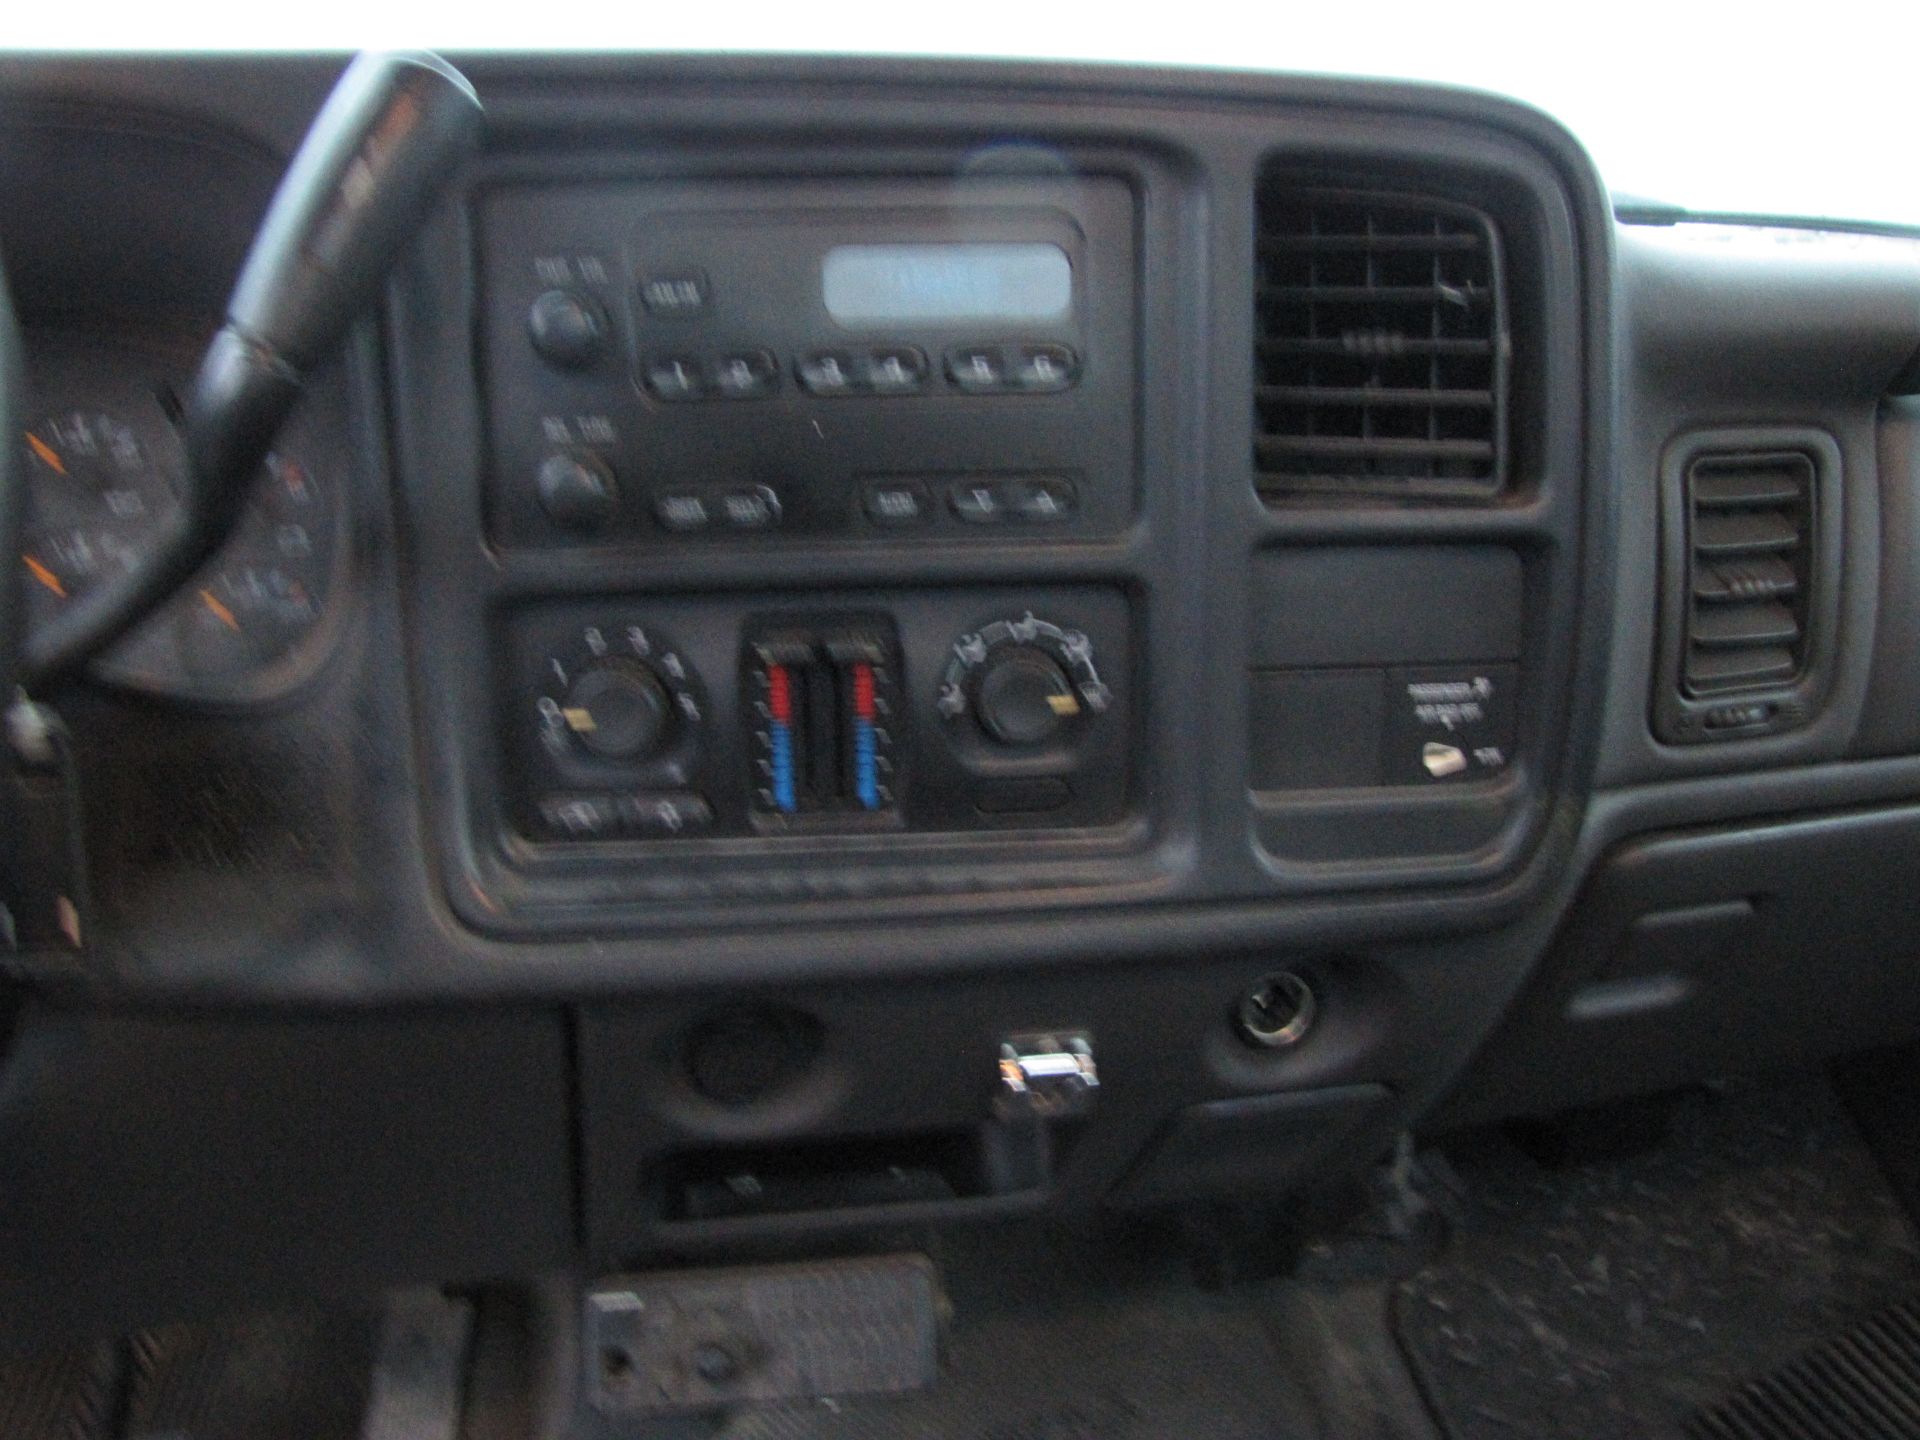 2006 Chevy 2500 HD pickup truck - Image 61 of 65